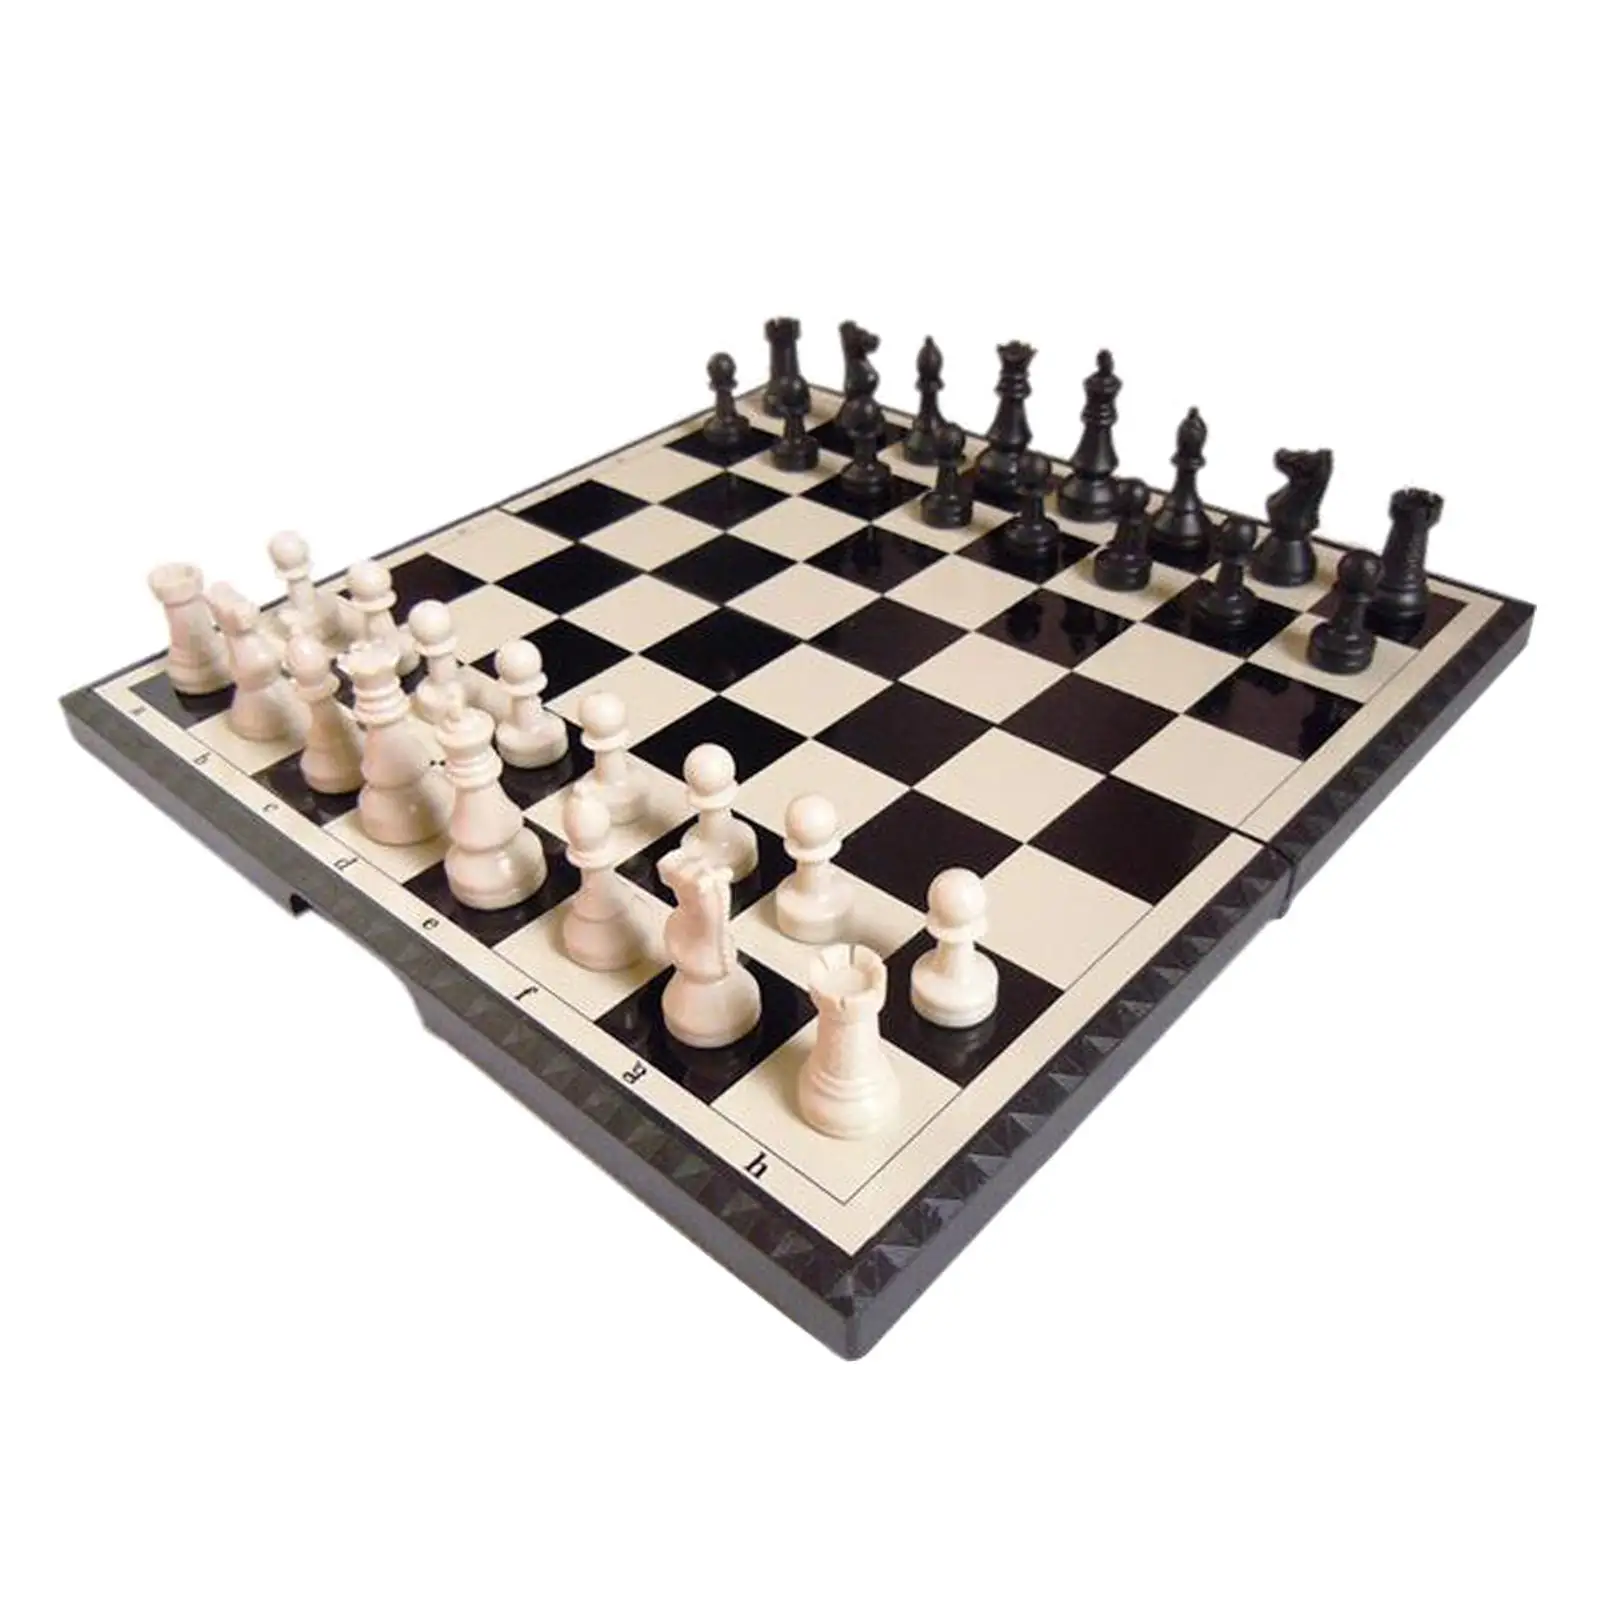 11-Inch International Chess Set Folding Chessboard Magnetic Chess Pieces Chess Game 2 Players Family Entertainment Board Game